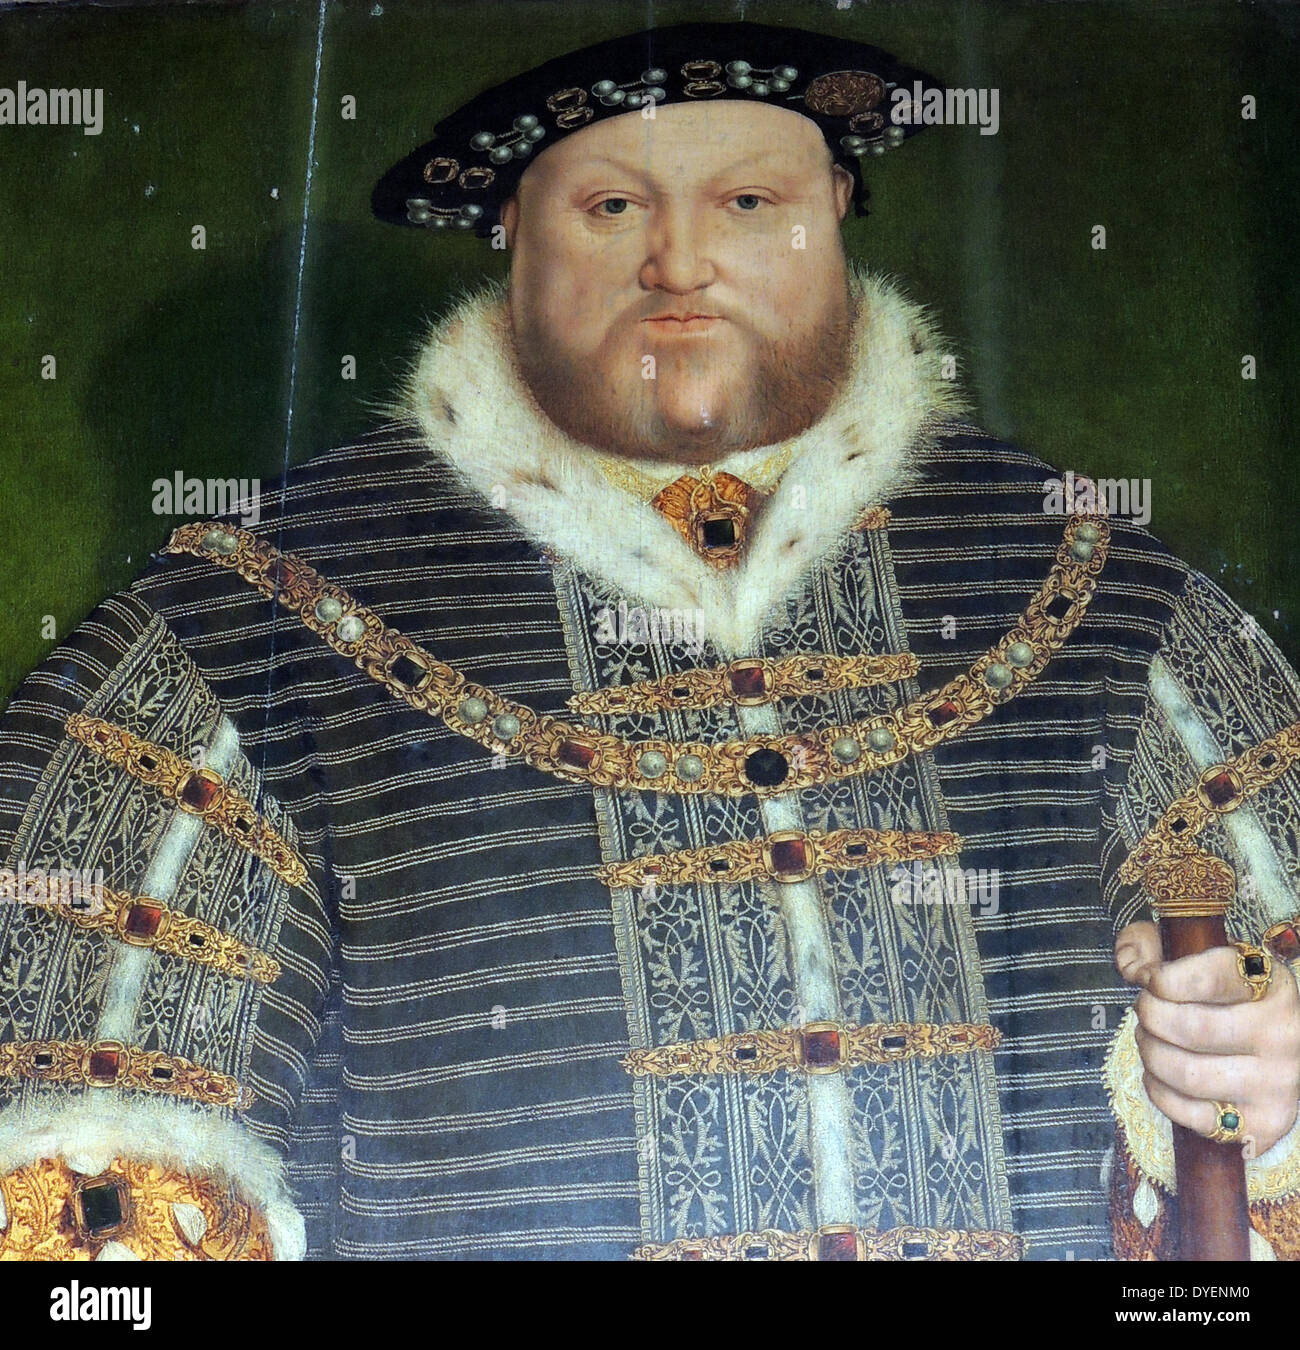 Henry VIII (28 June 1491 – 28 January 1547) was king of England from 21 April 1509 until his death. He was lord, and later king, of Ireland. studio of Hans Holbein, Warwick castle Stock Photo